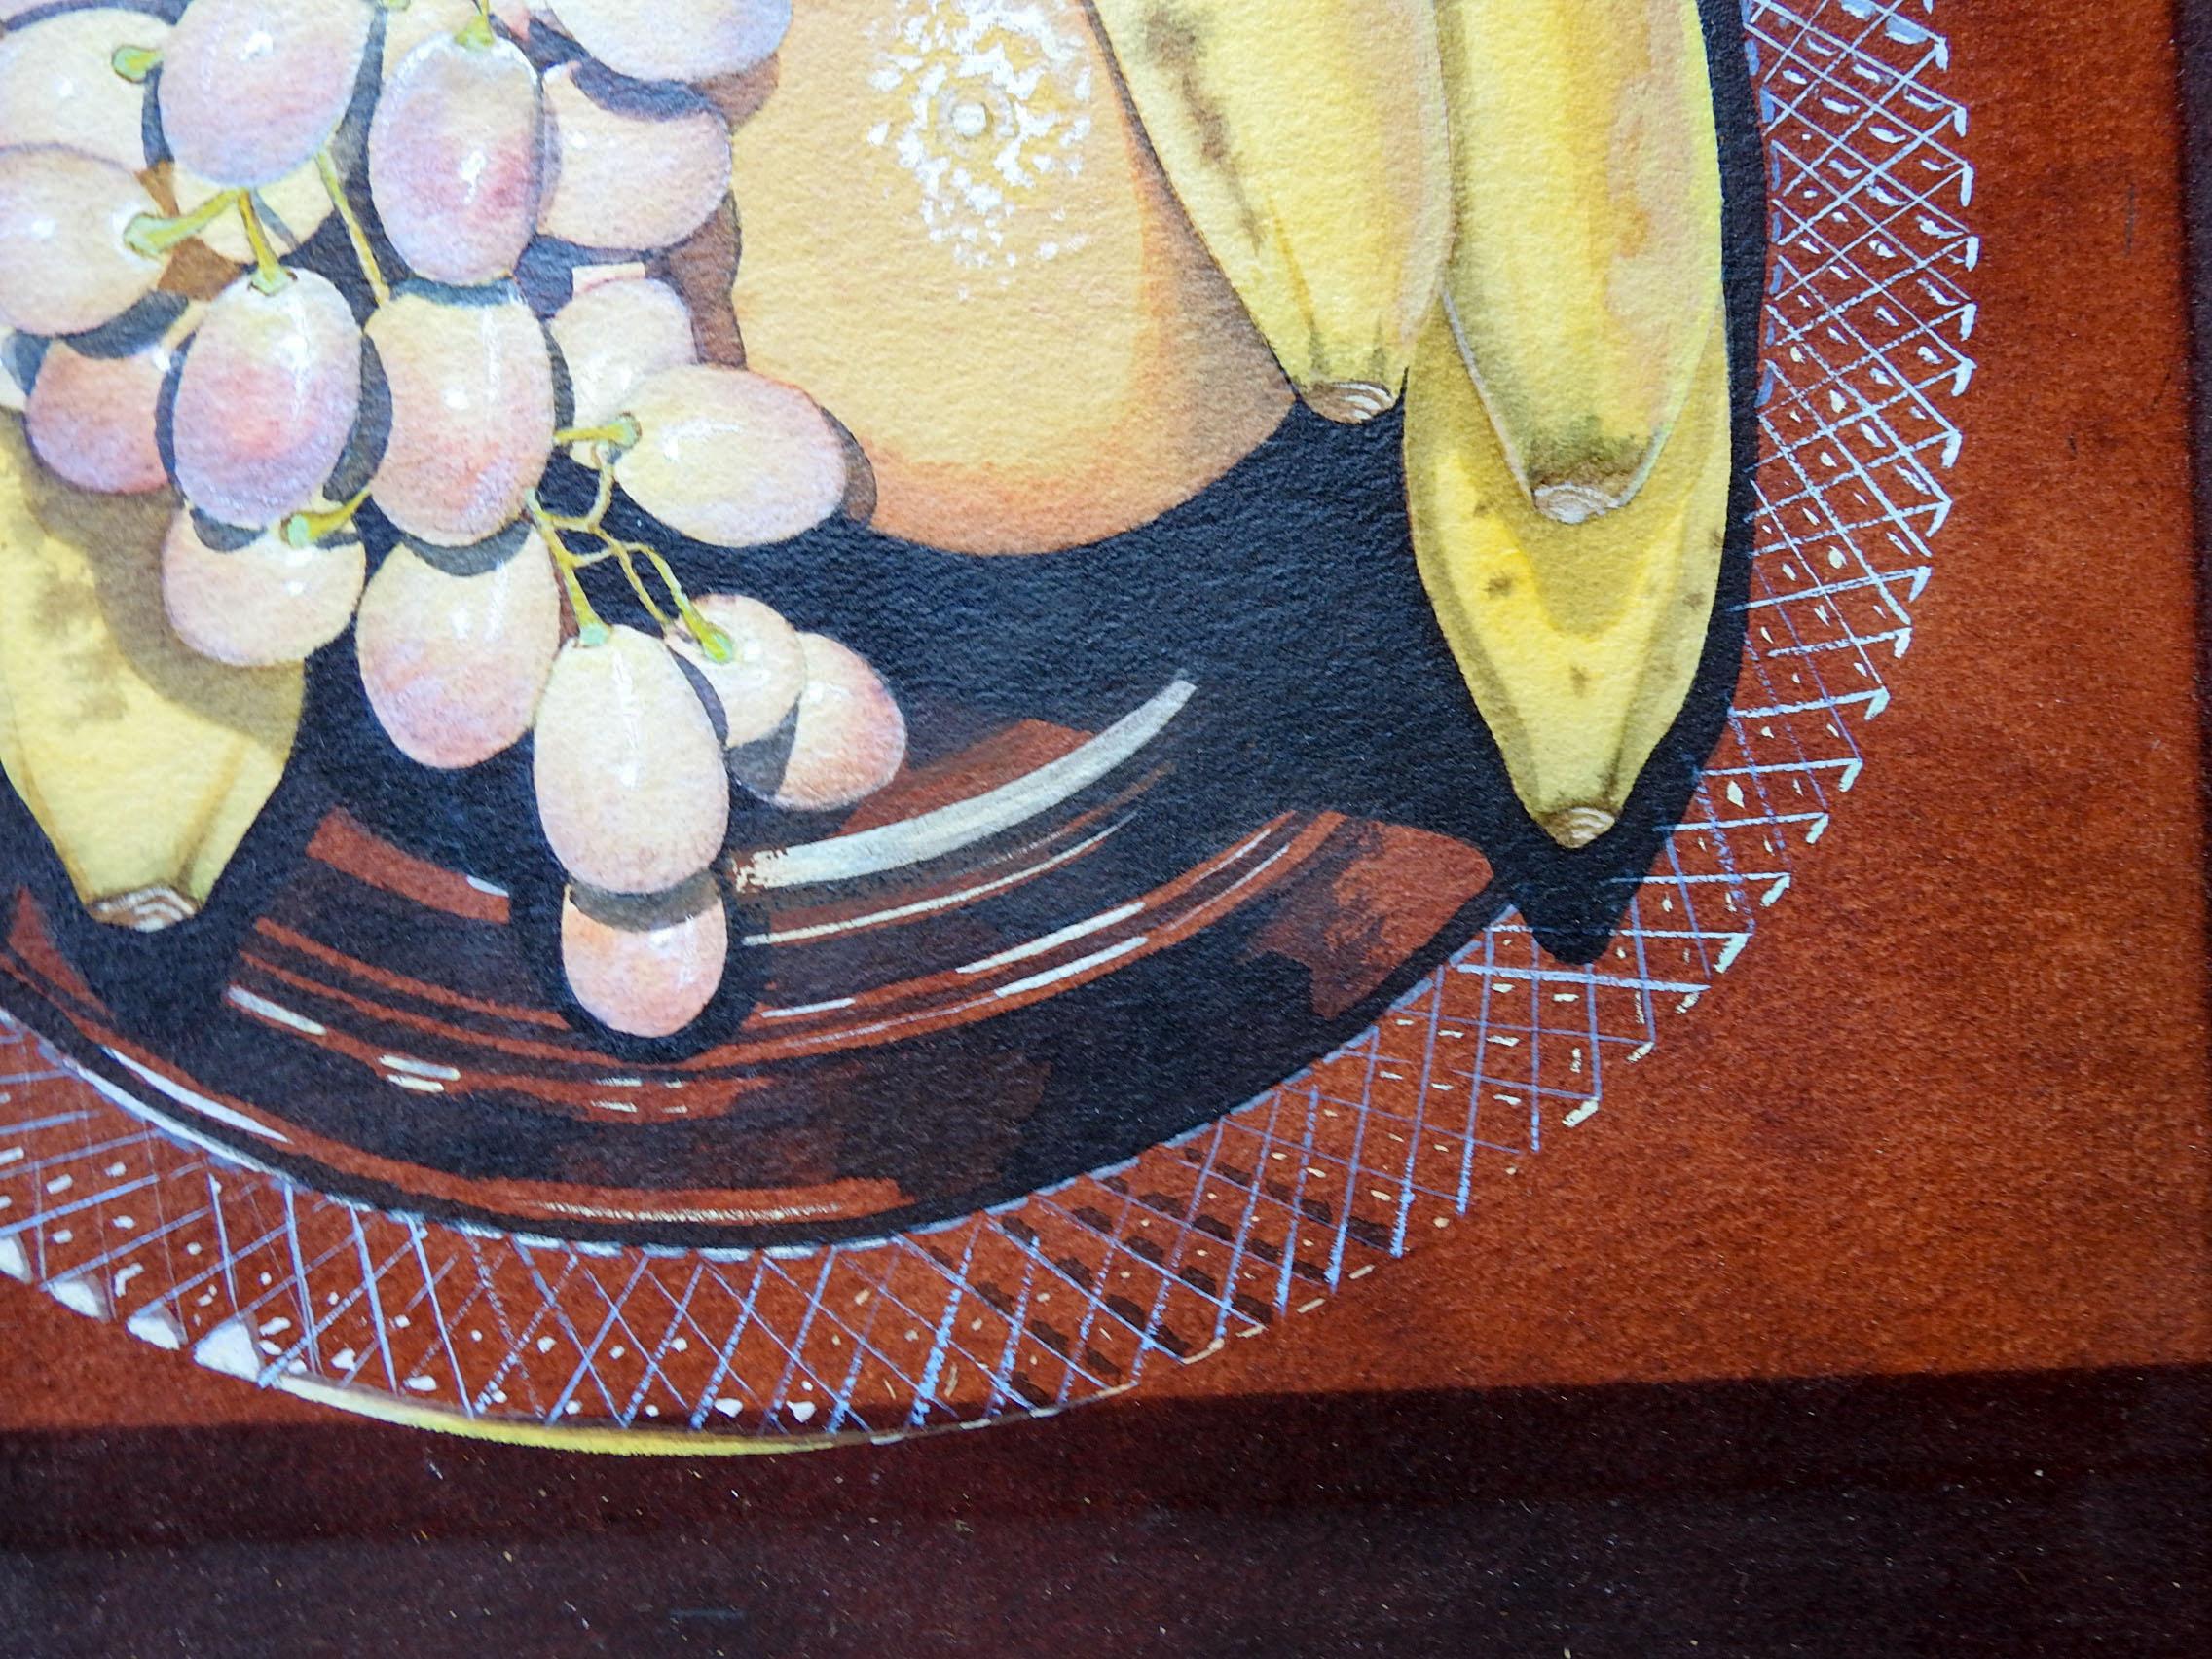 American Vintage Still Life Painting With Bananas & Grapes For Sale